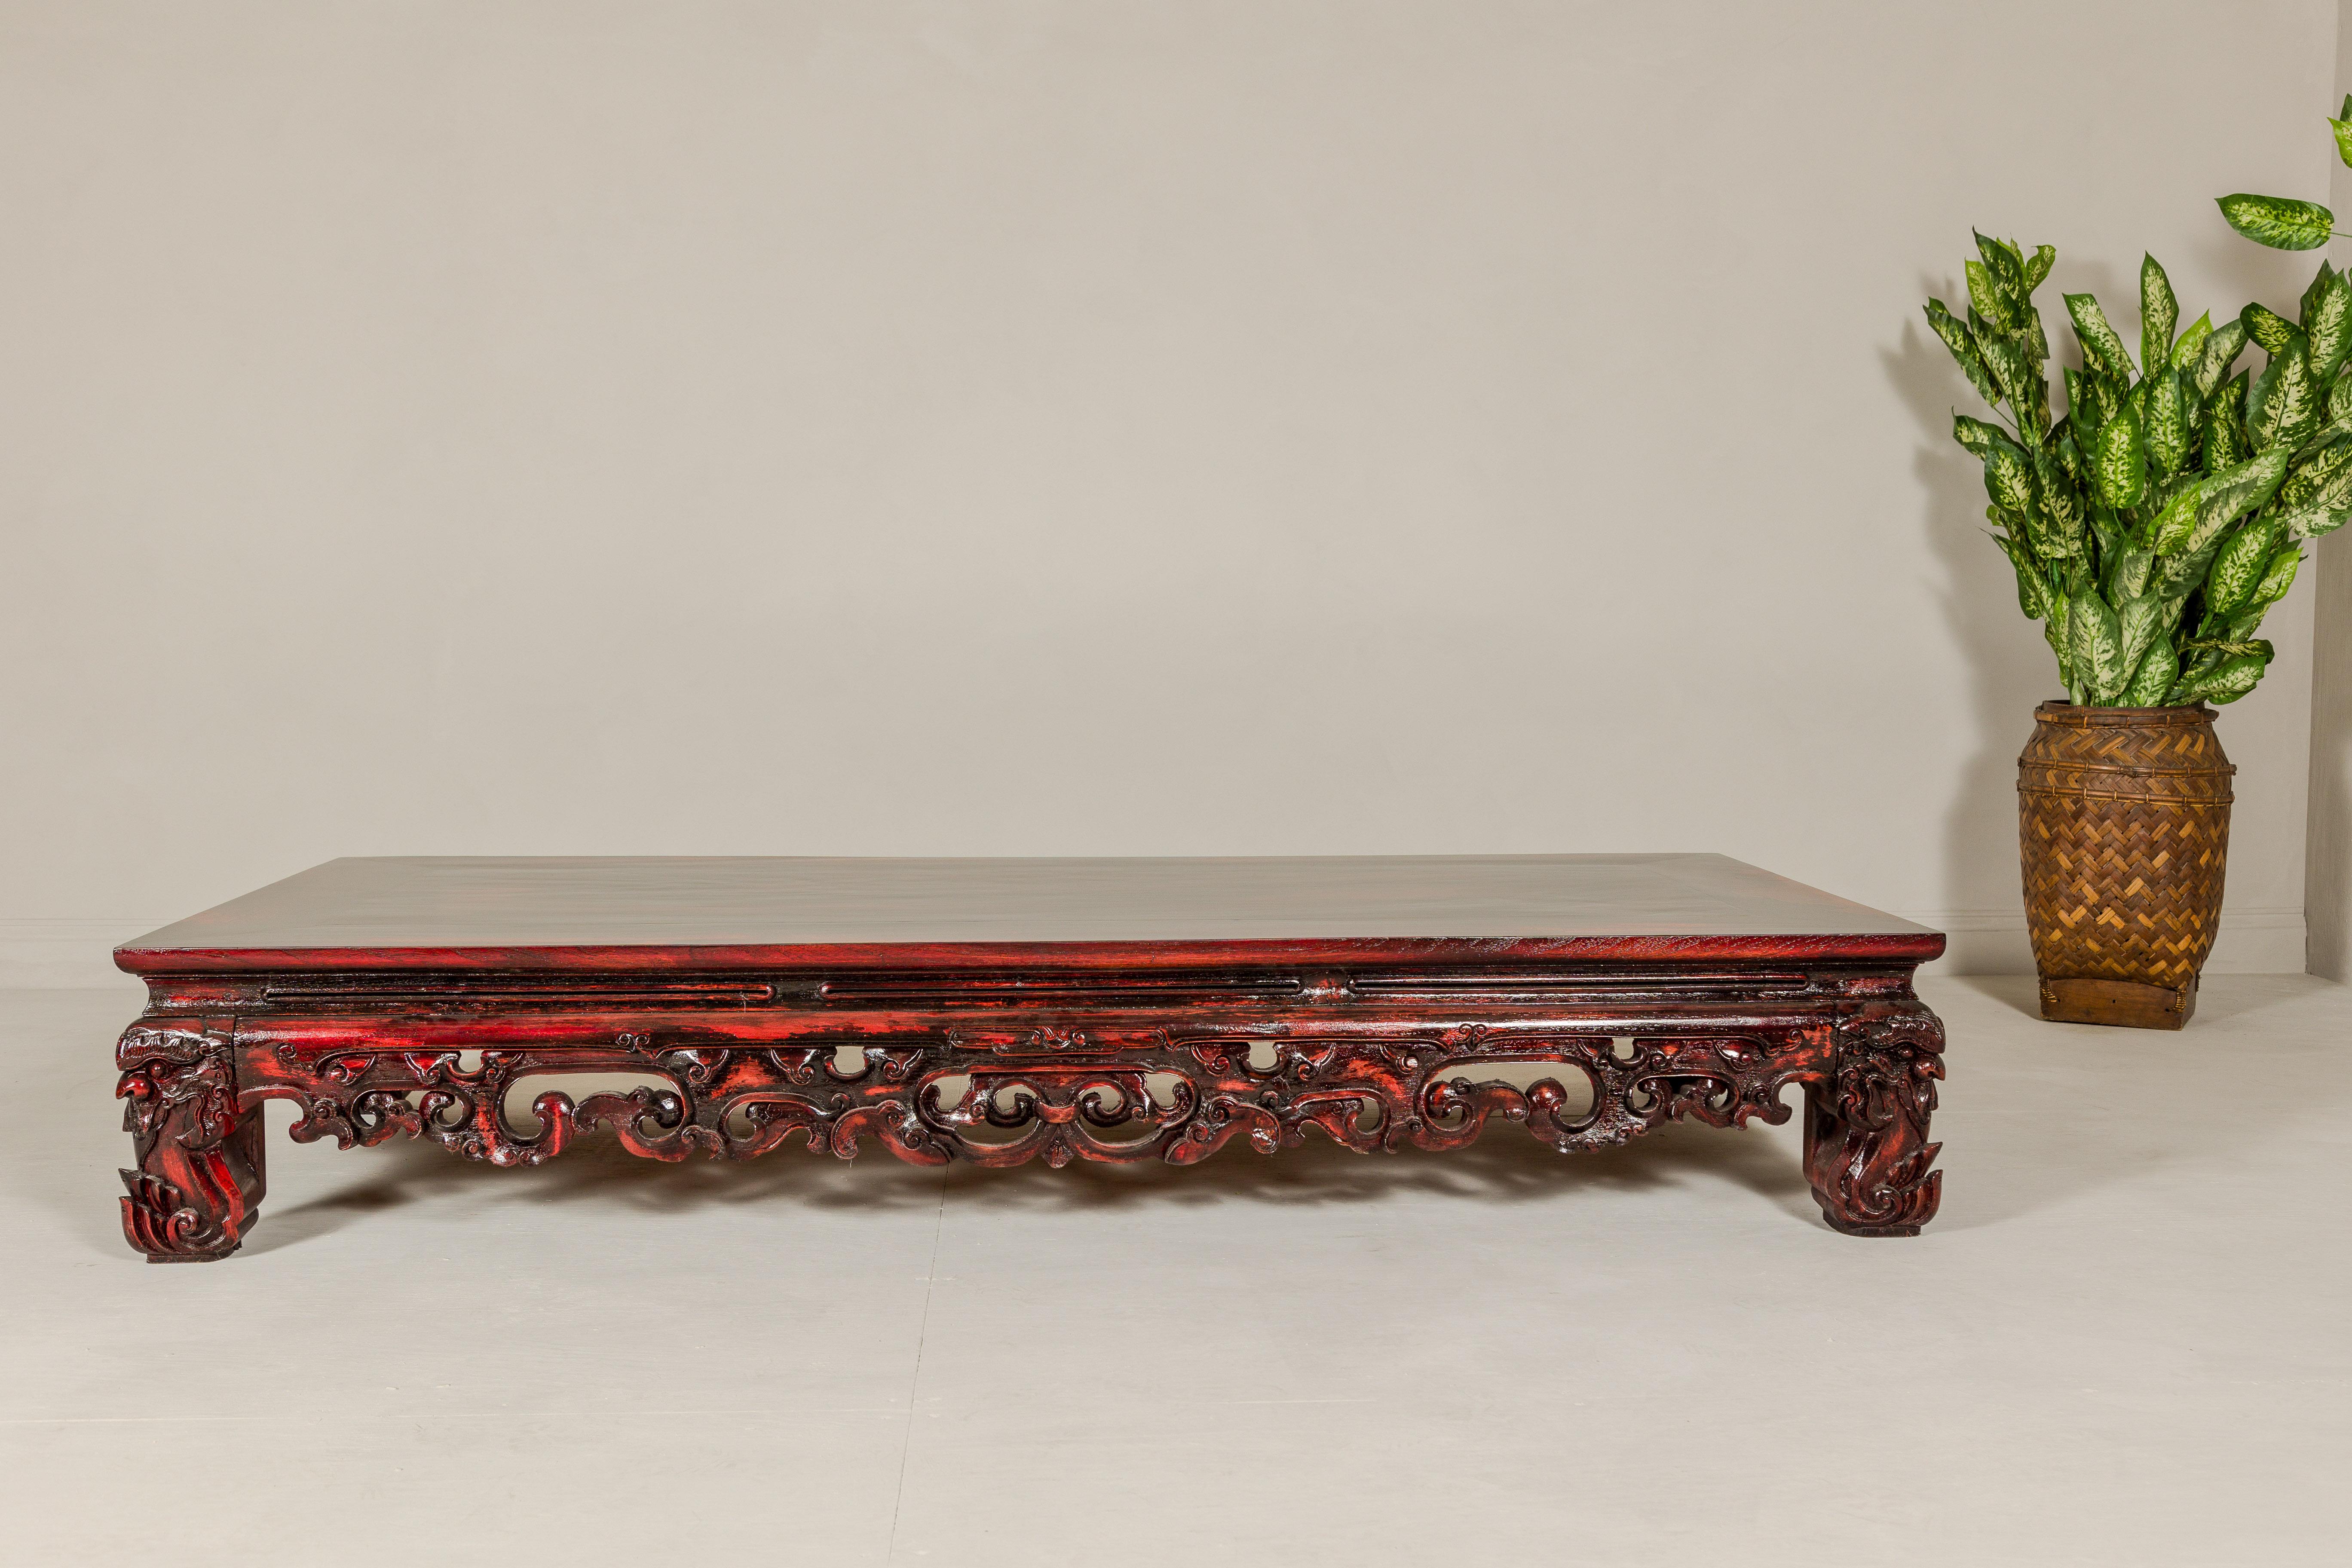 Chinese Qing Dynasty Low Kang Coffee Table with Reddish Brown Finish and Carved Décor For Sale